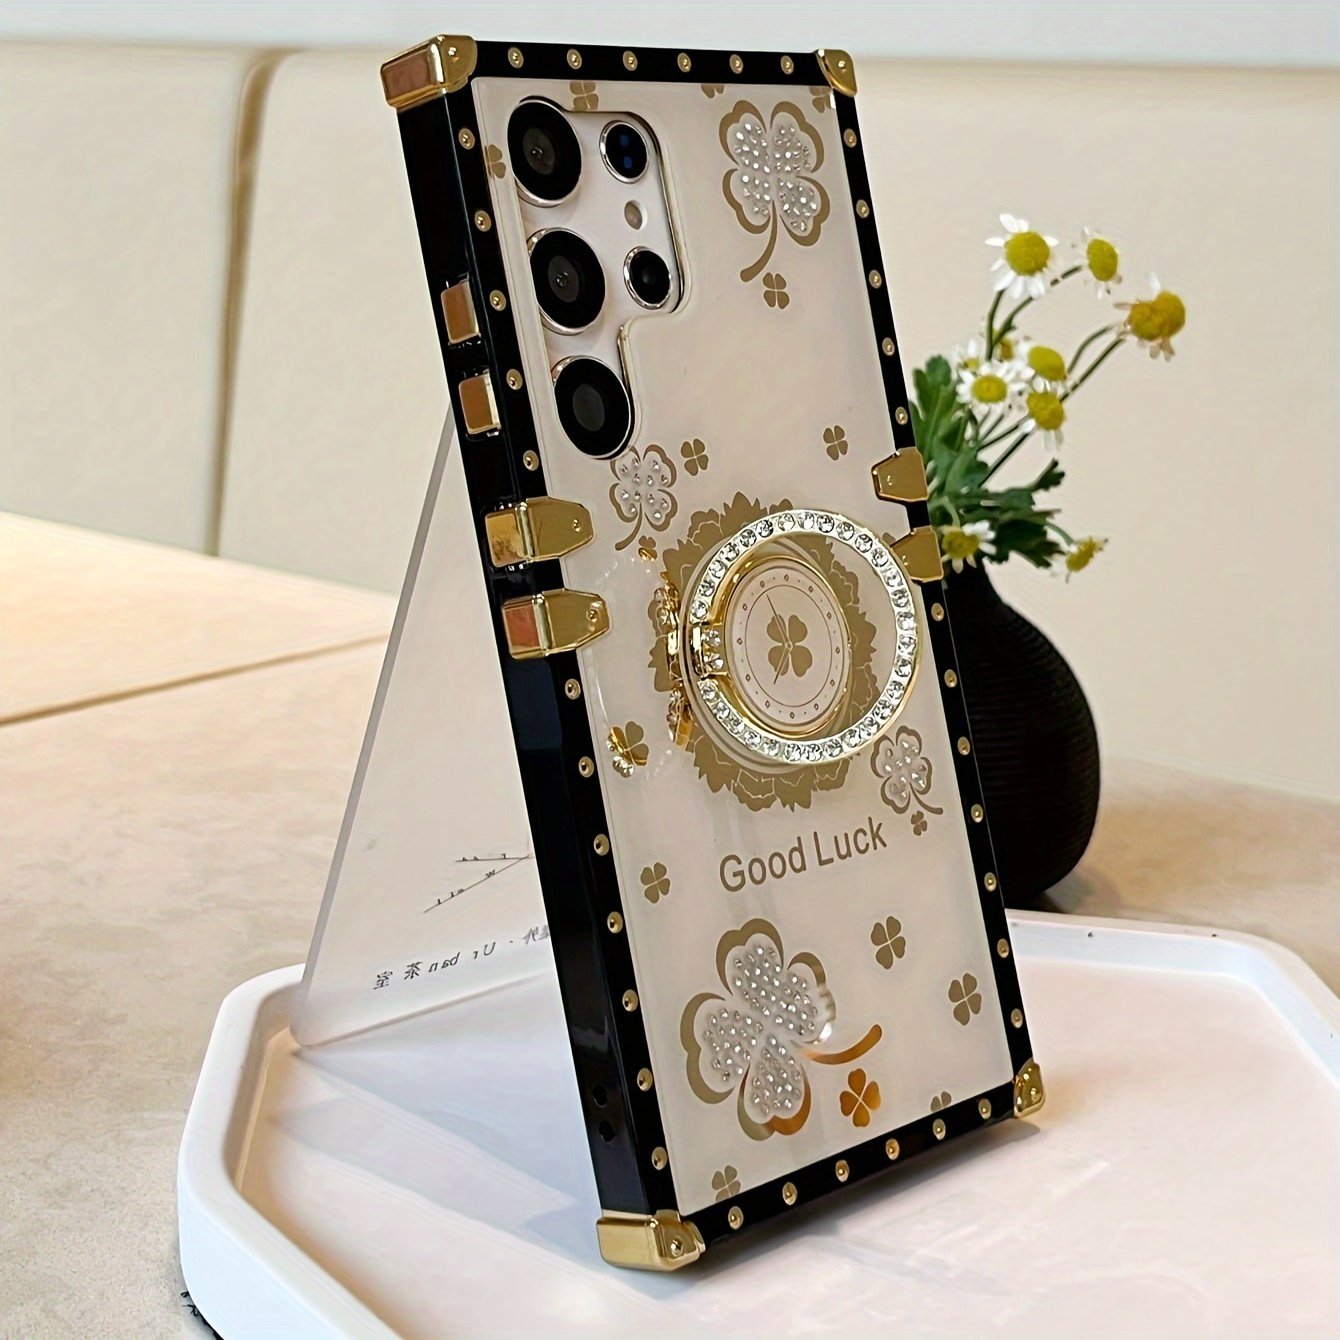 A Square Lucky Four-leaf Clover Stand Gorgeous Fashion Drop Protection Phone Case For IPhone Samsung Phones